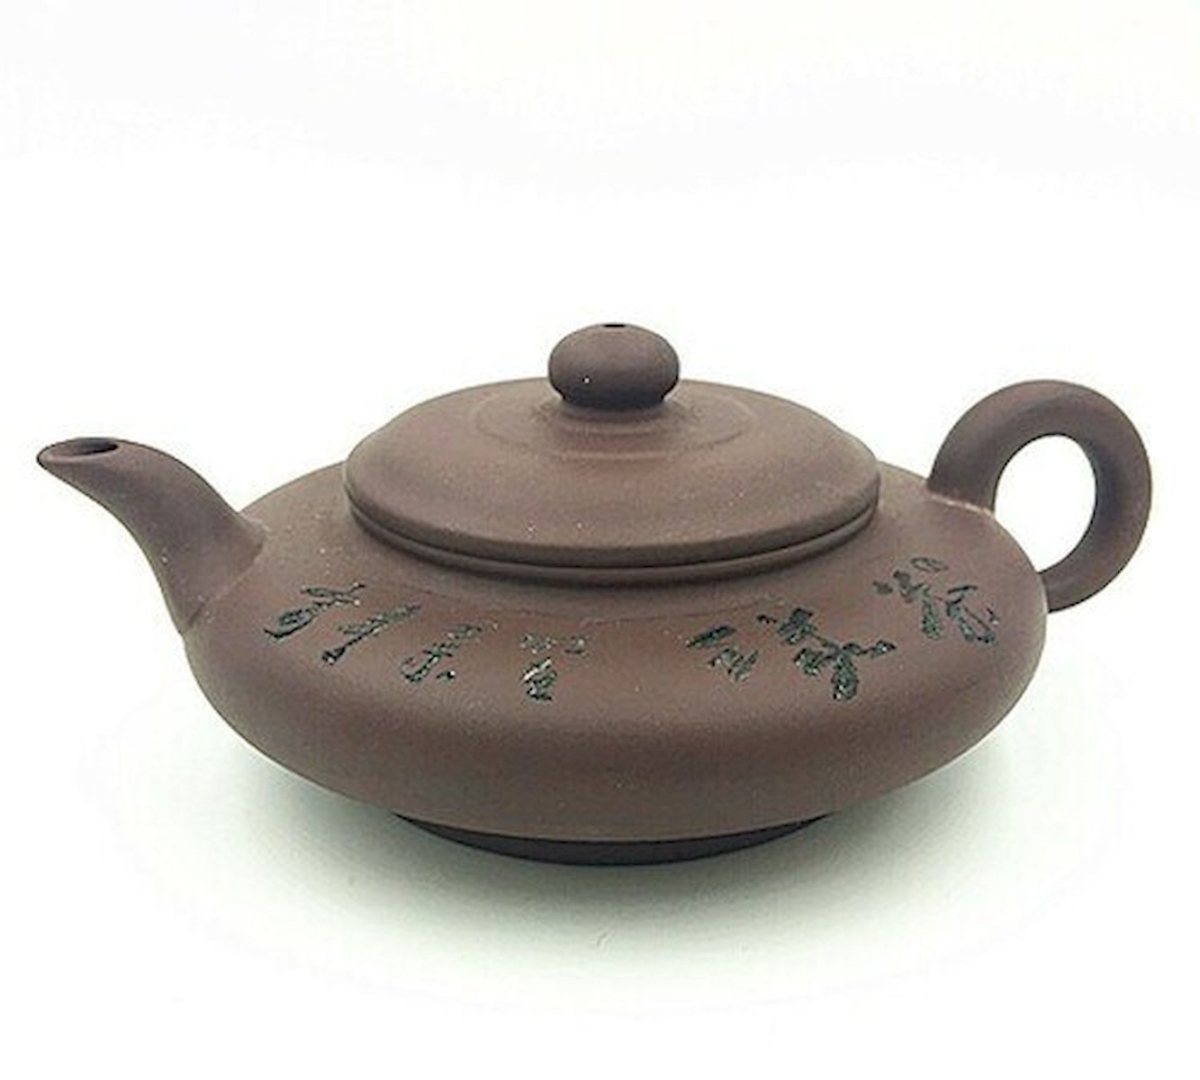 Picture of Mr. MJs HO-YX-1003 Yixing Clay Teapot